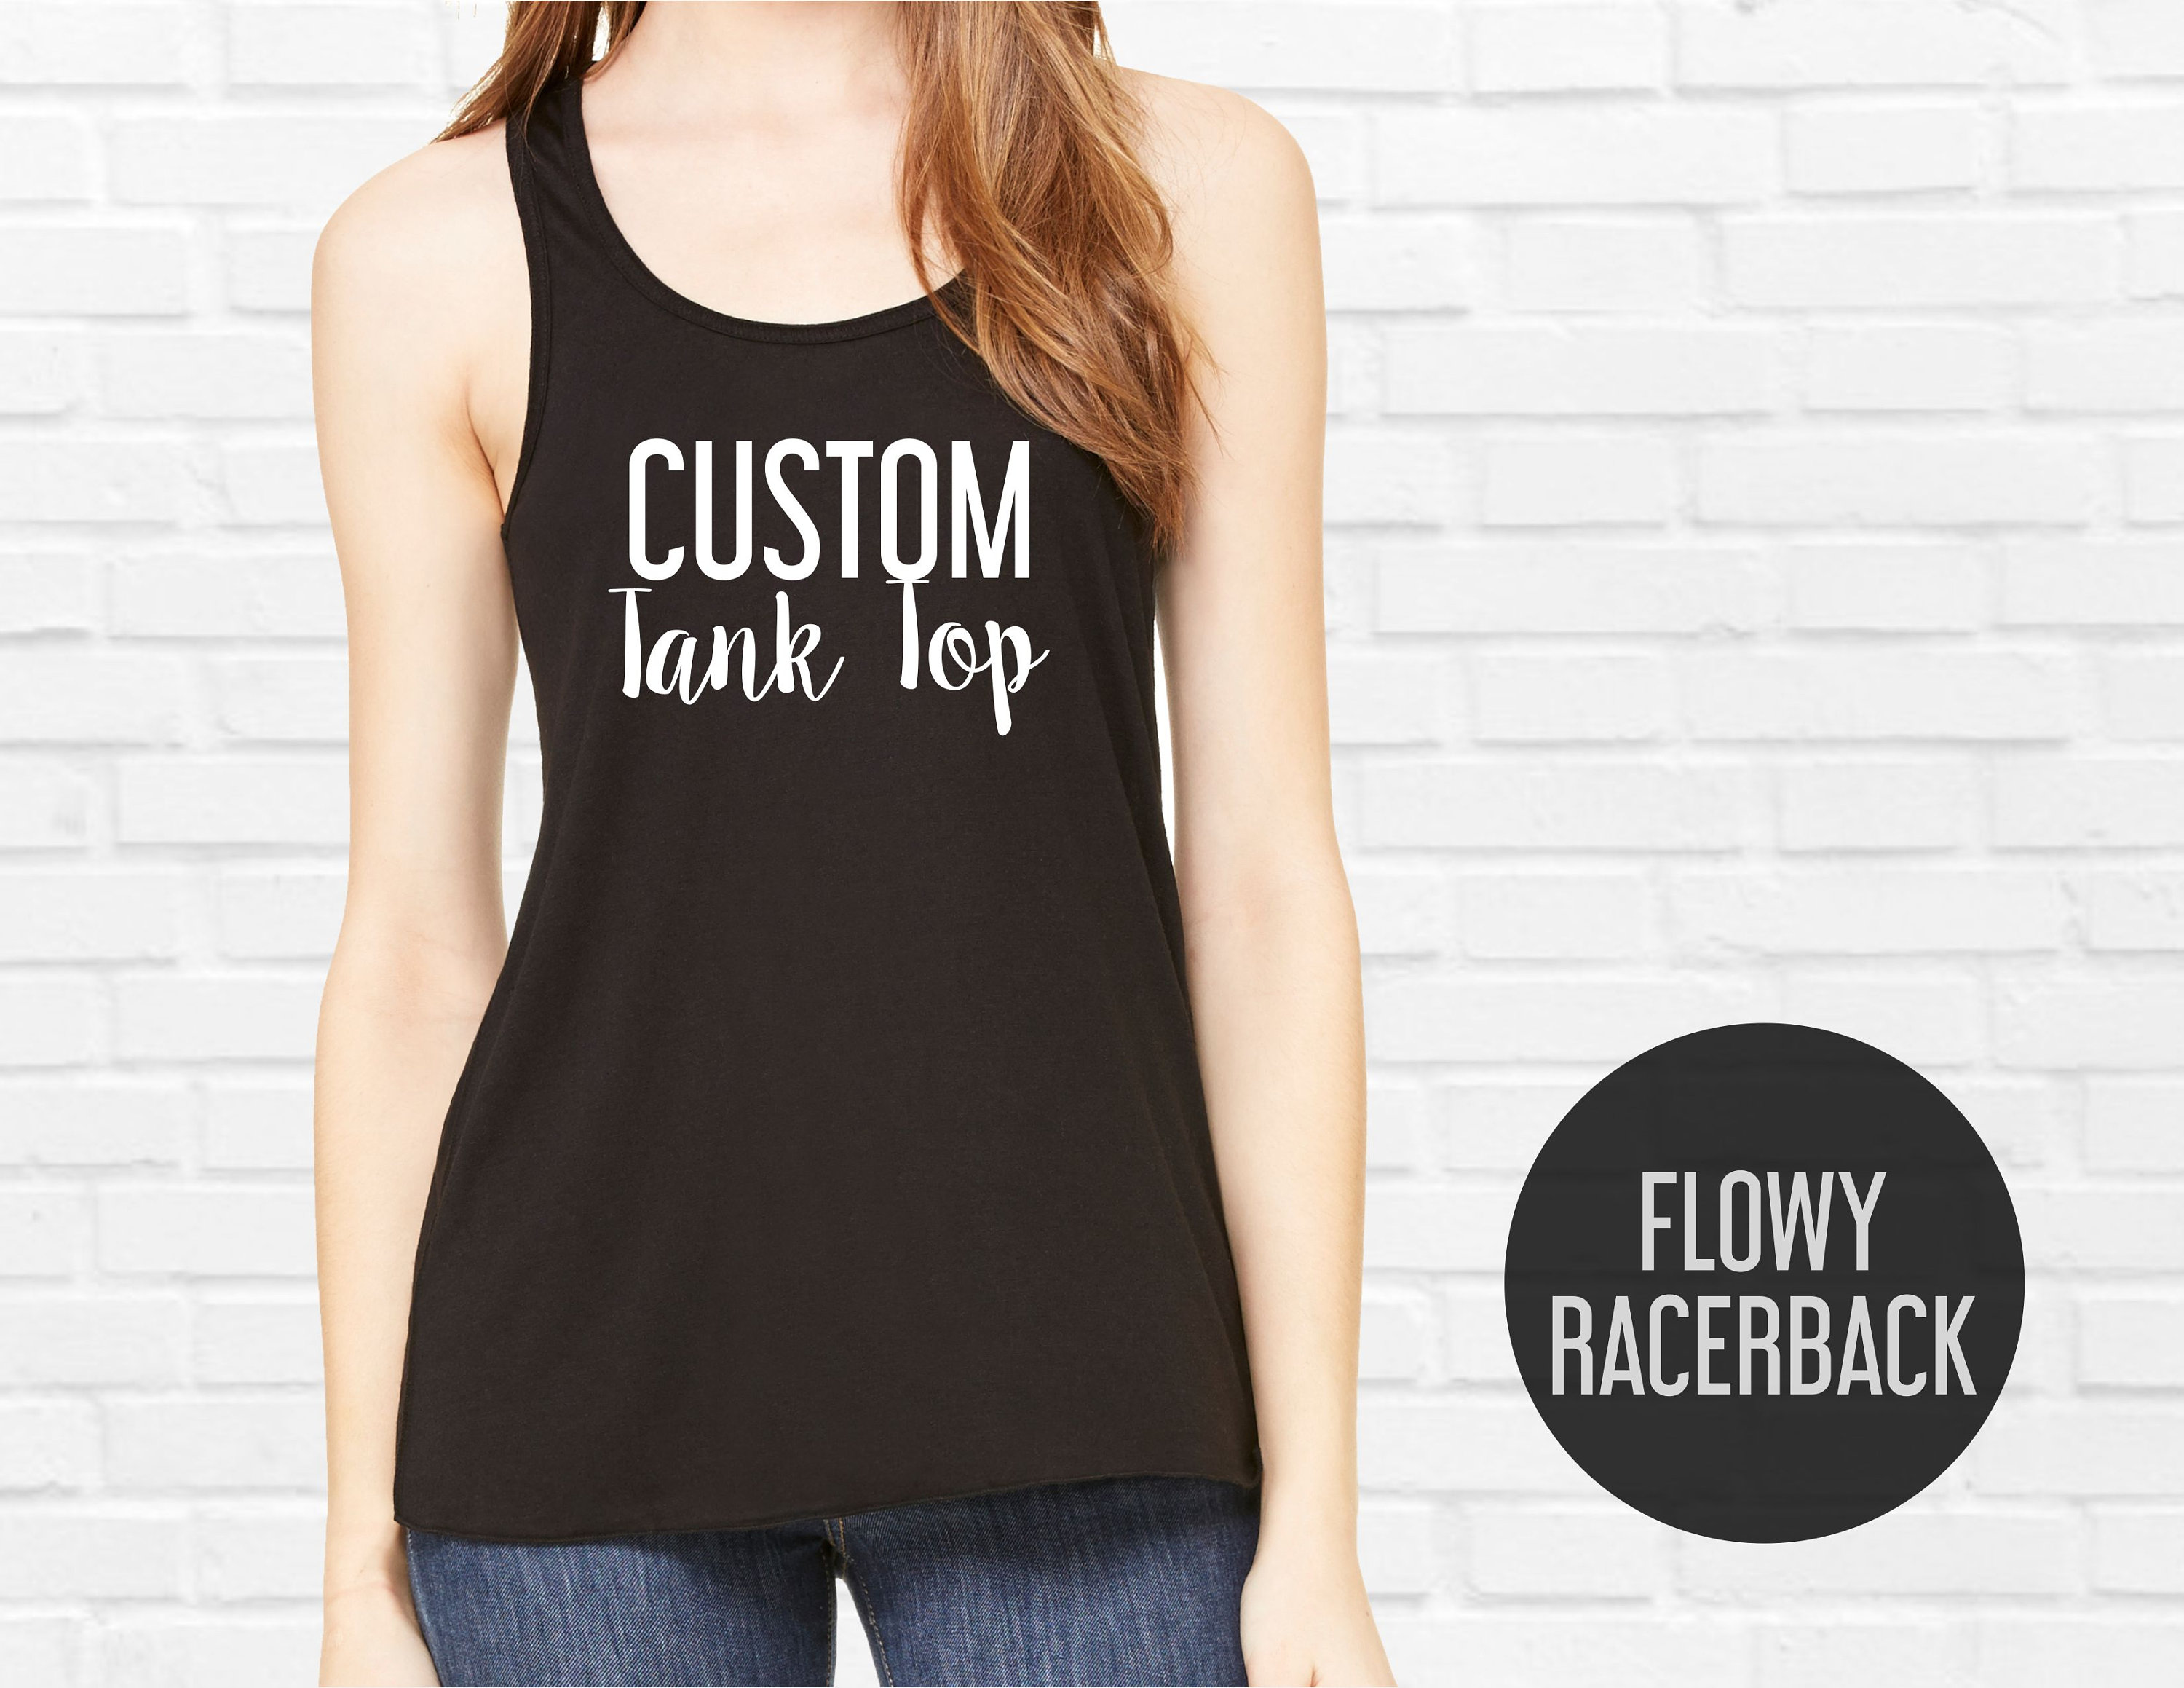 We Grow At Different Rates Flowy Racerback Tank